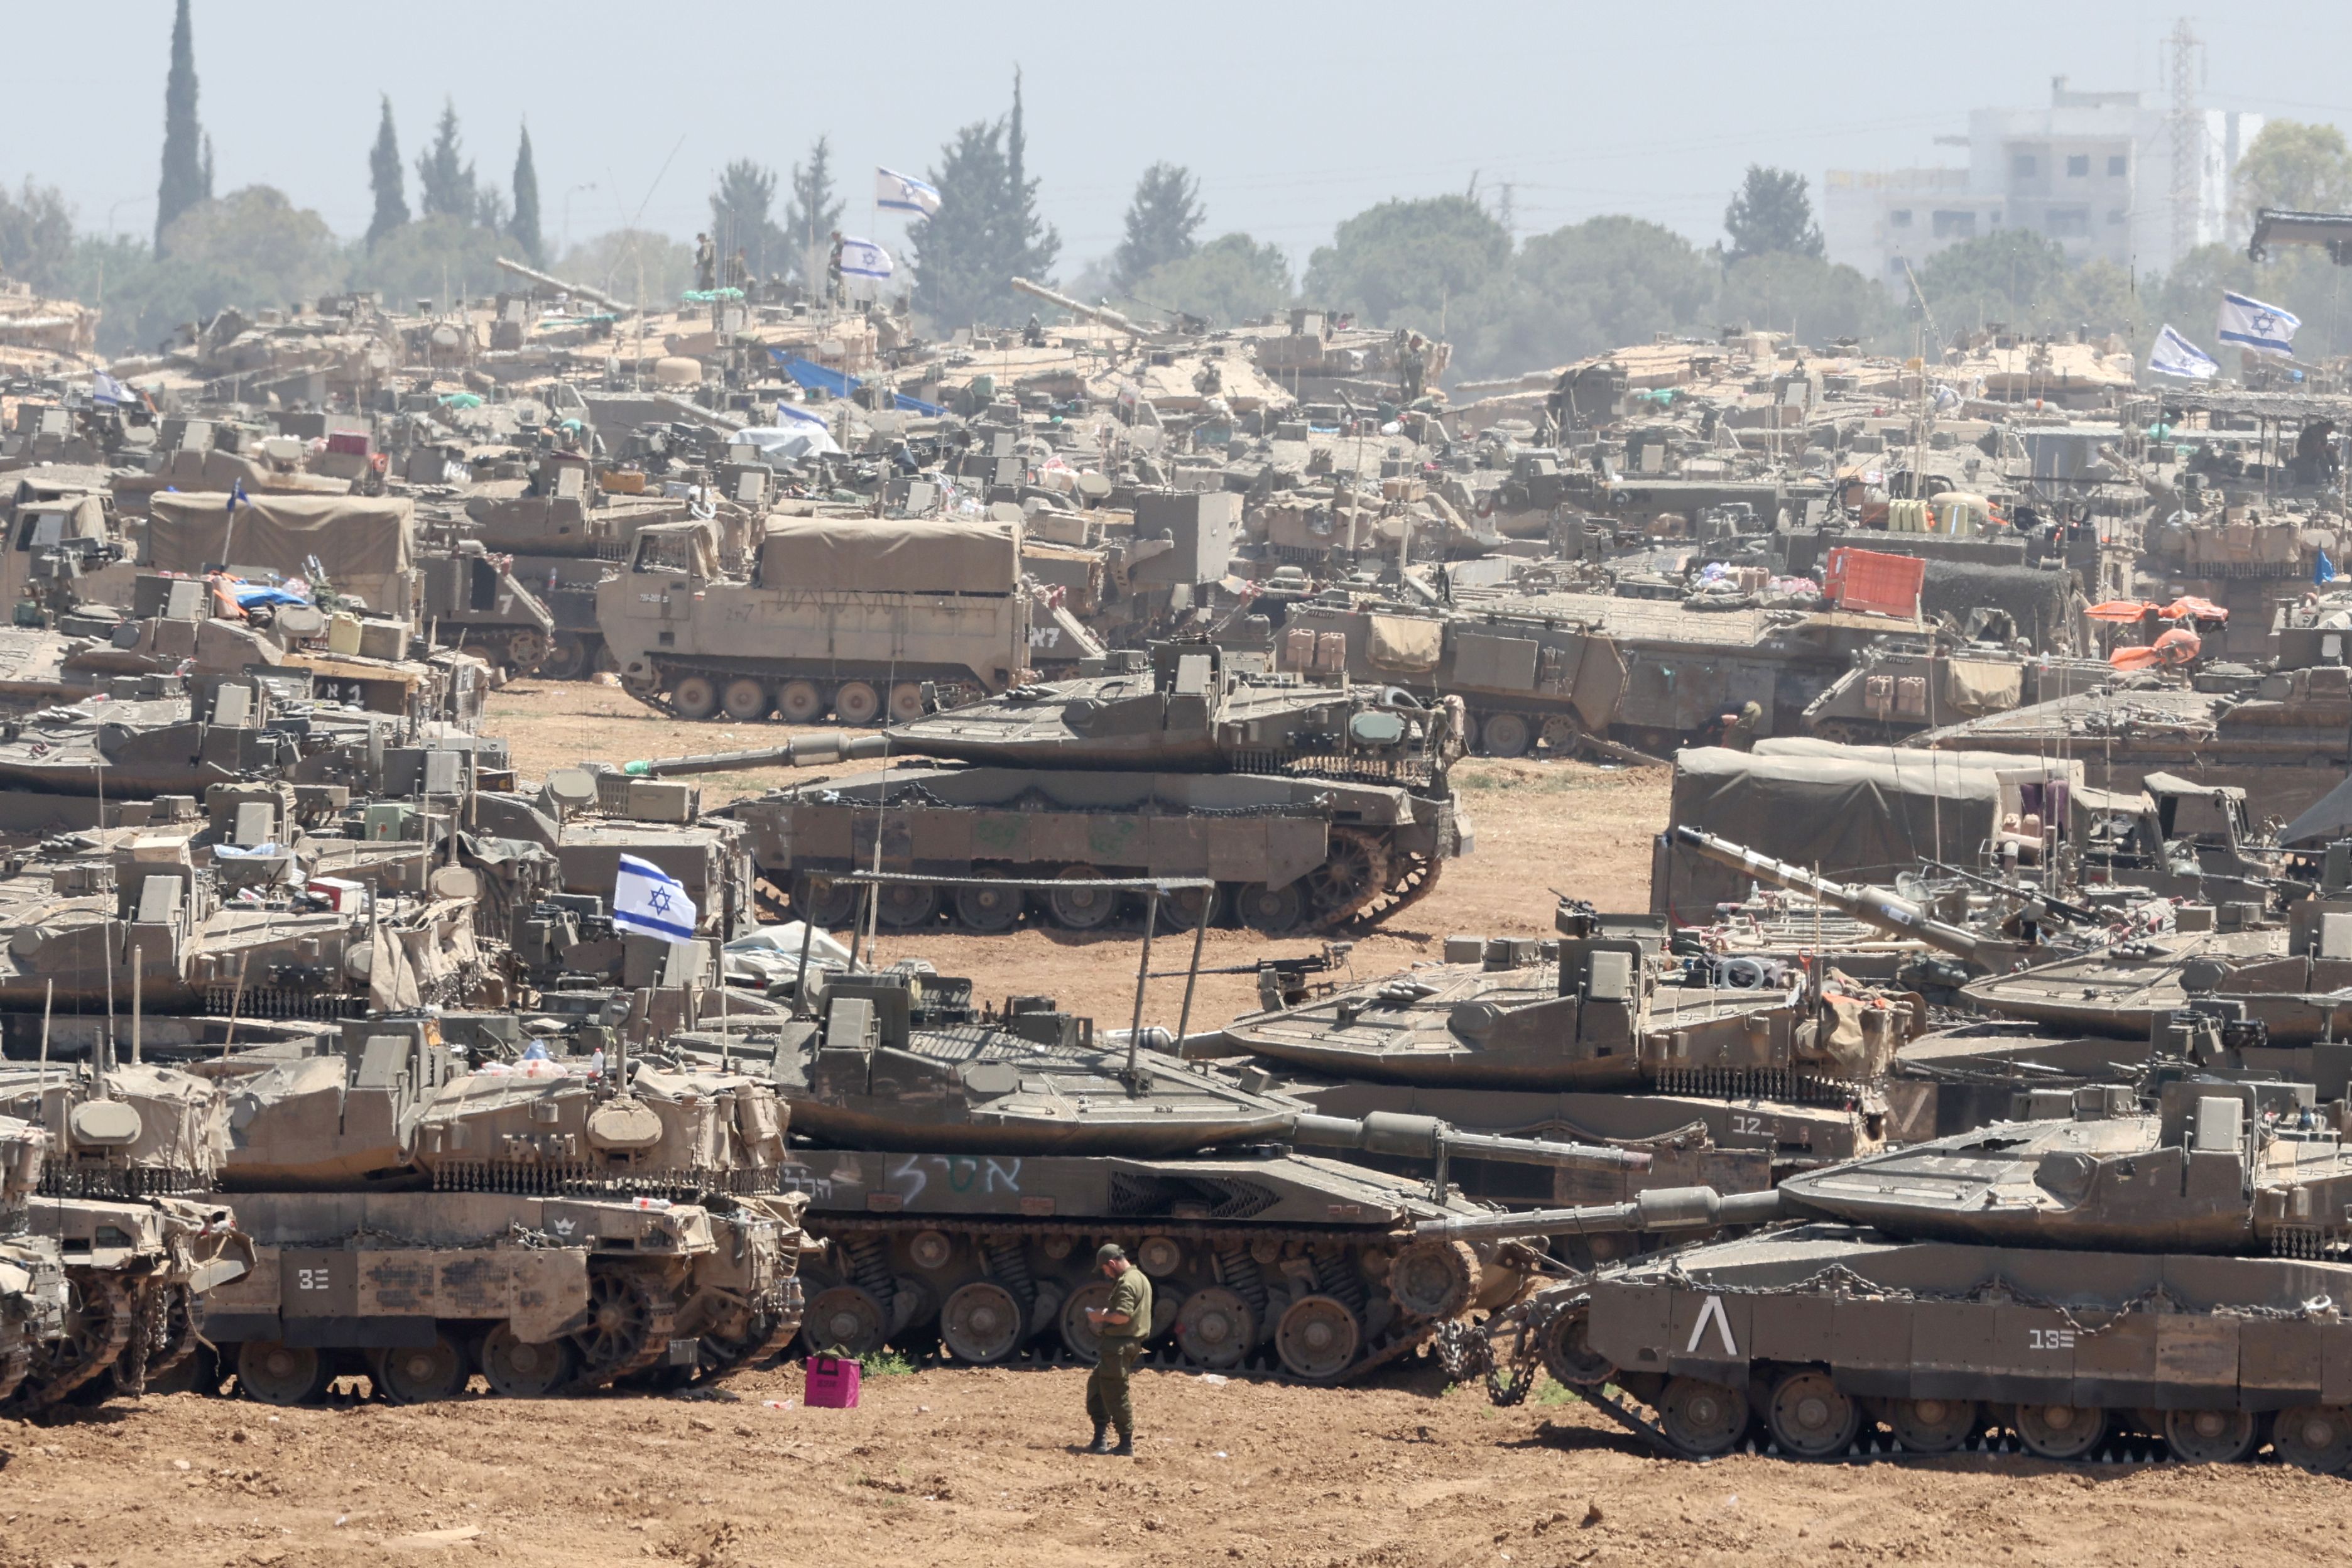 middle east conflict live updates: cease-fire talks stall; netanyahu says israel can fight solo